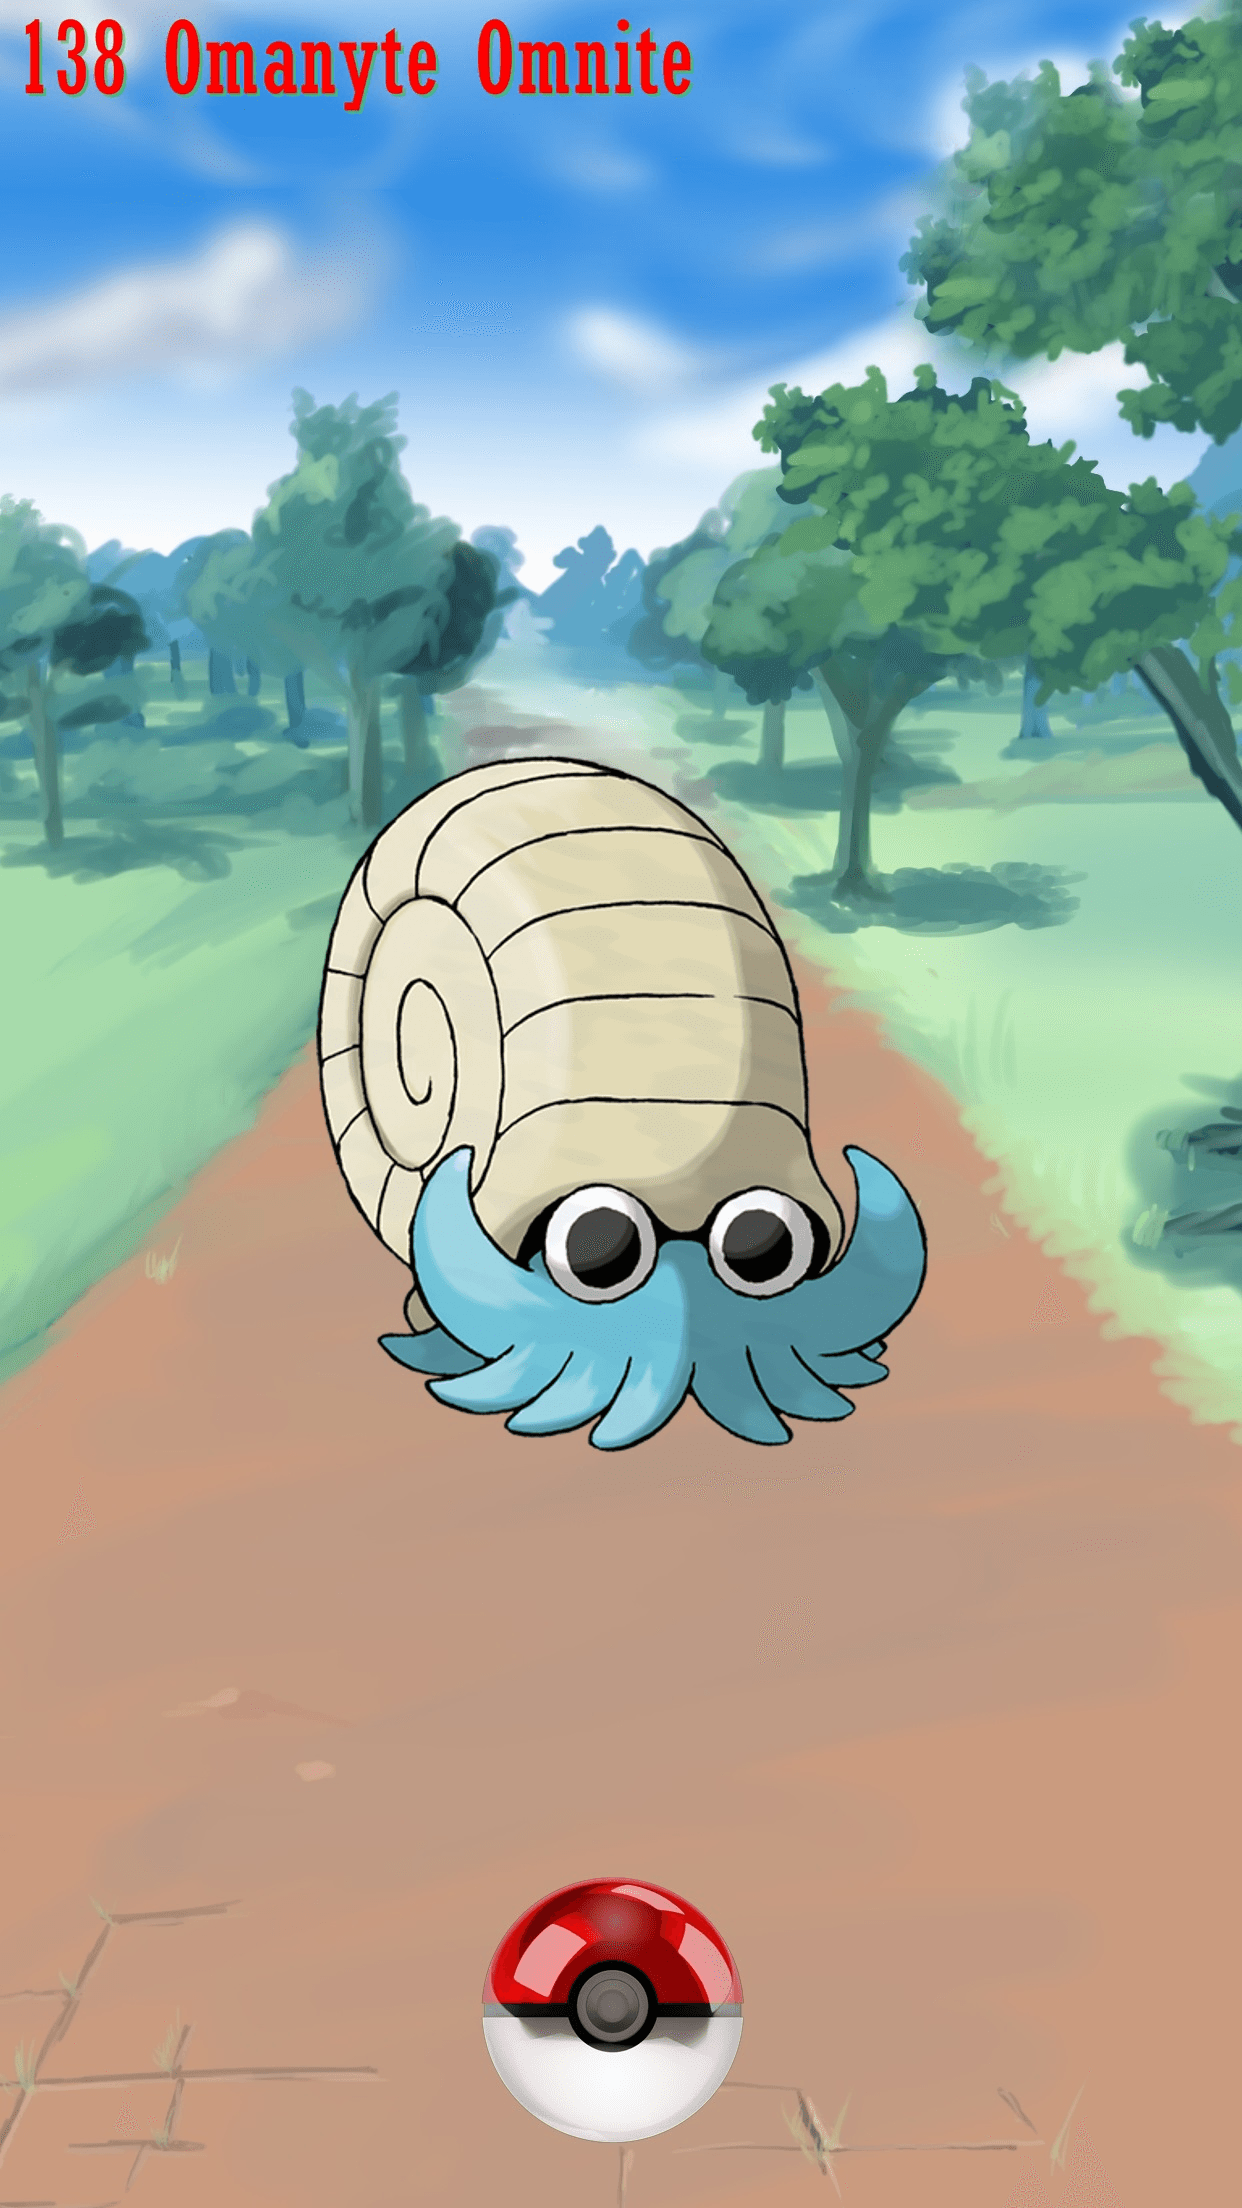 Omanyte HD Wallpapers - Wallpaper Cave